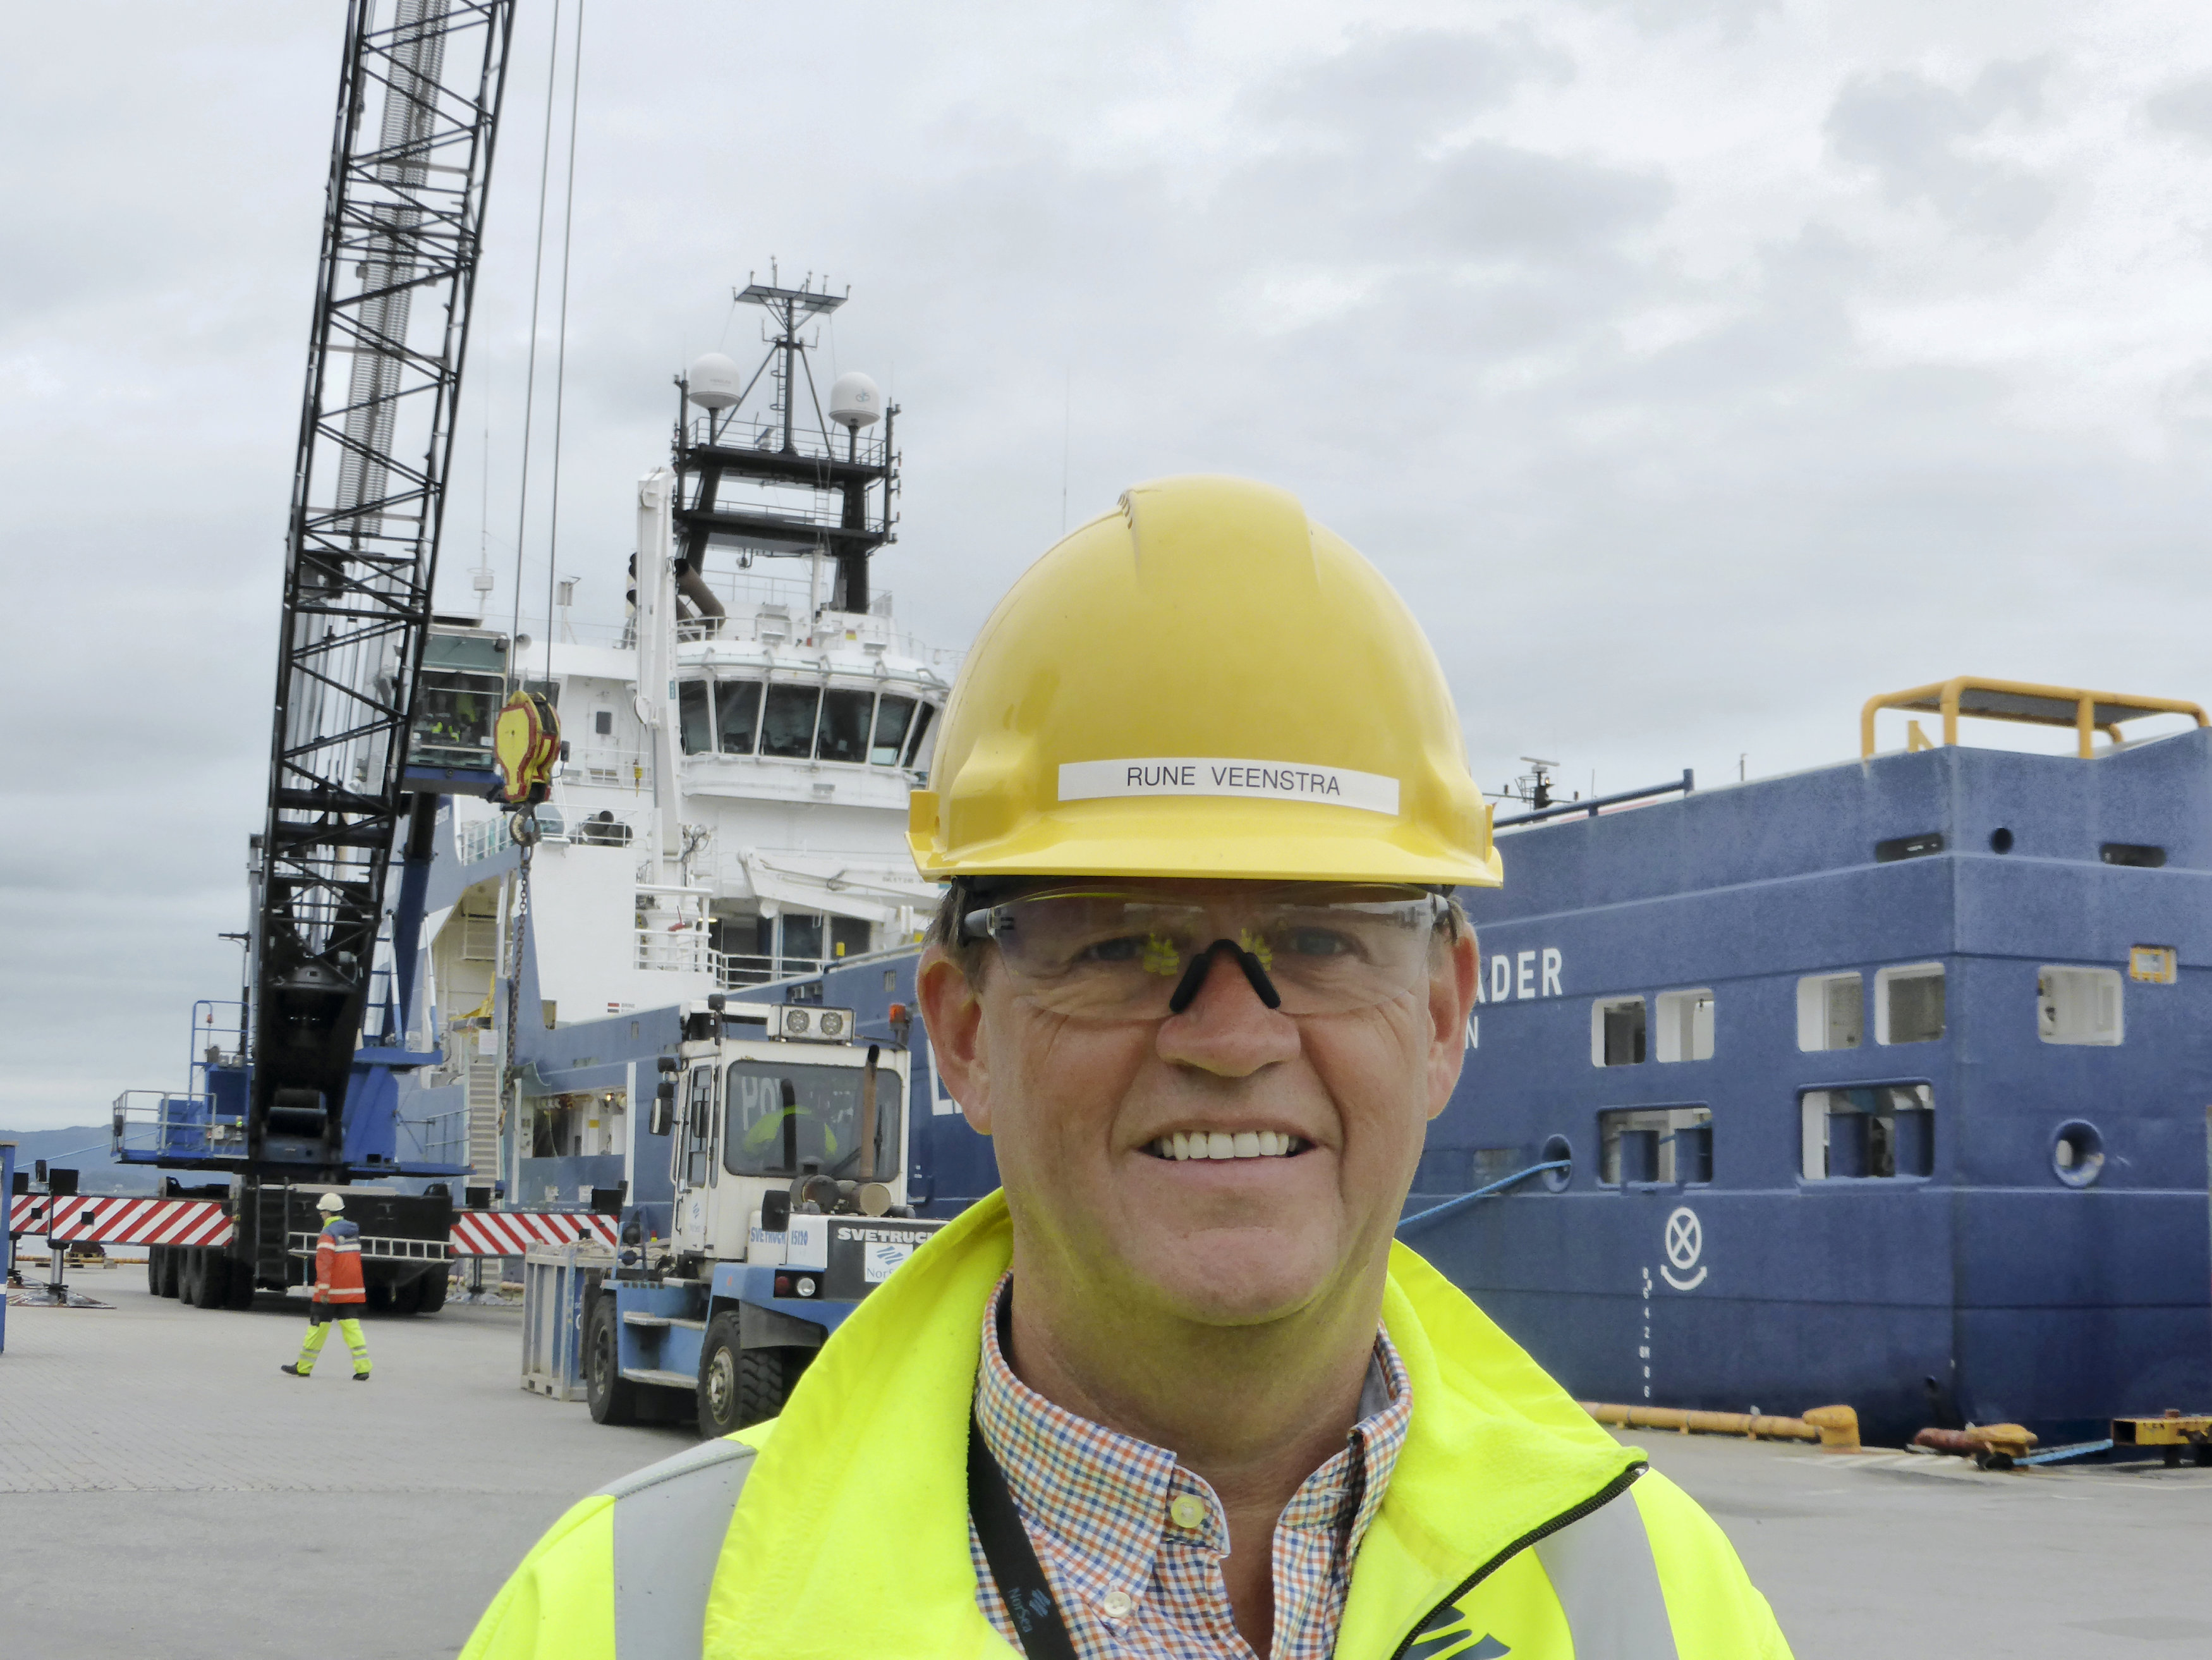 Rune Veenstra, the managing director of the port poses for the picture in Dusavik, Norway August 28, 2017. (Gwladys Fouche / Reuters)